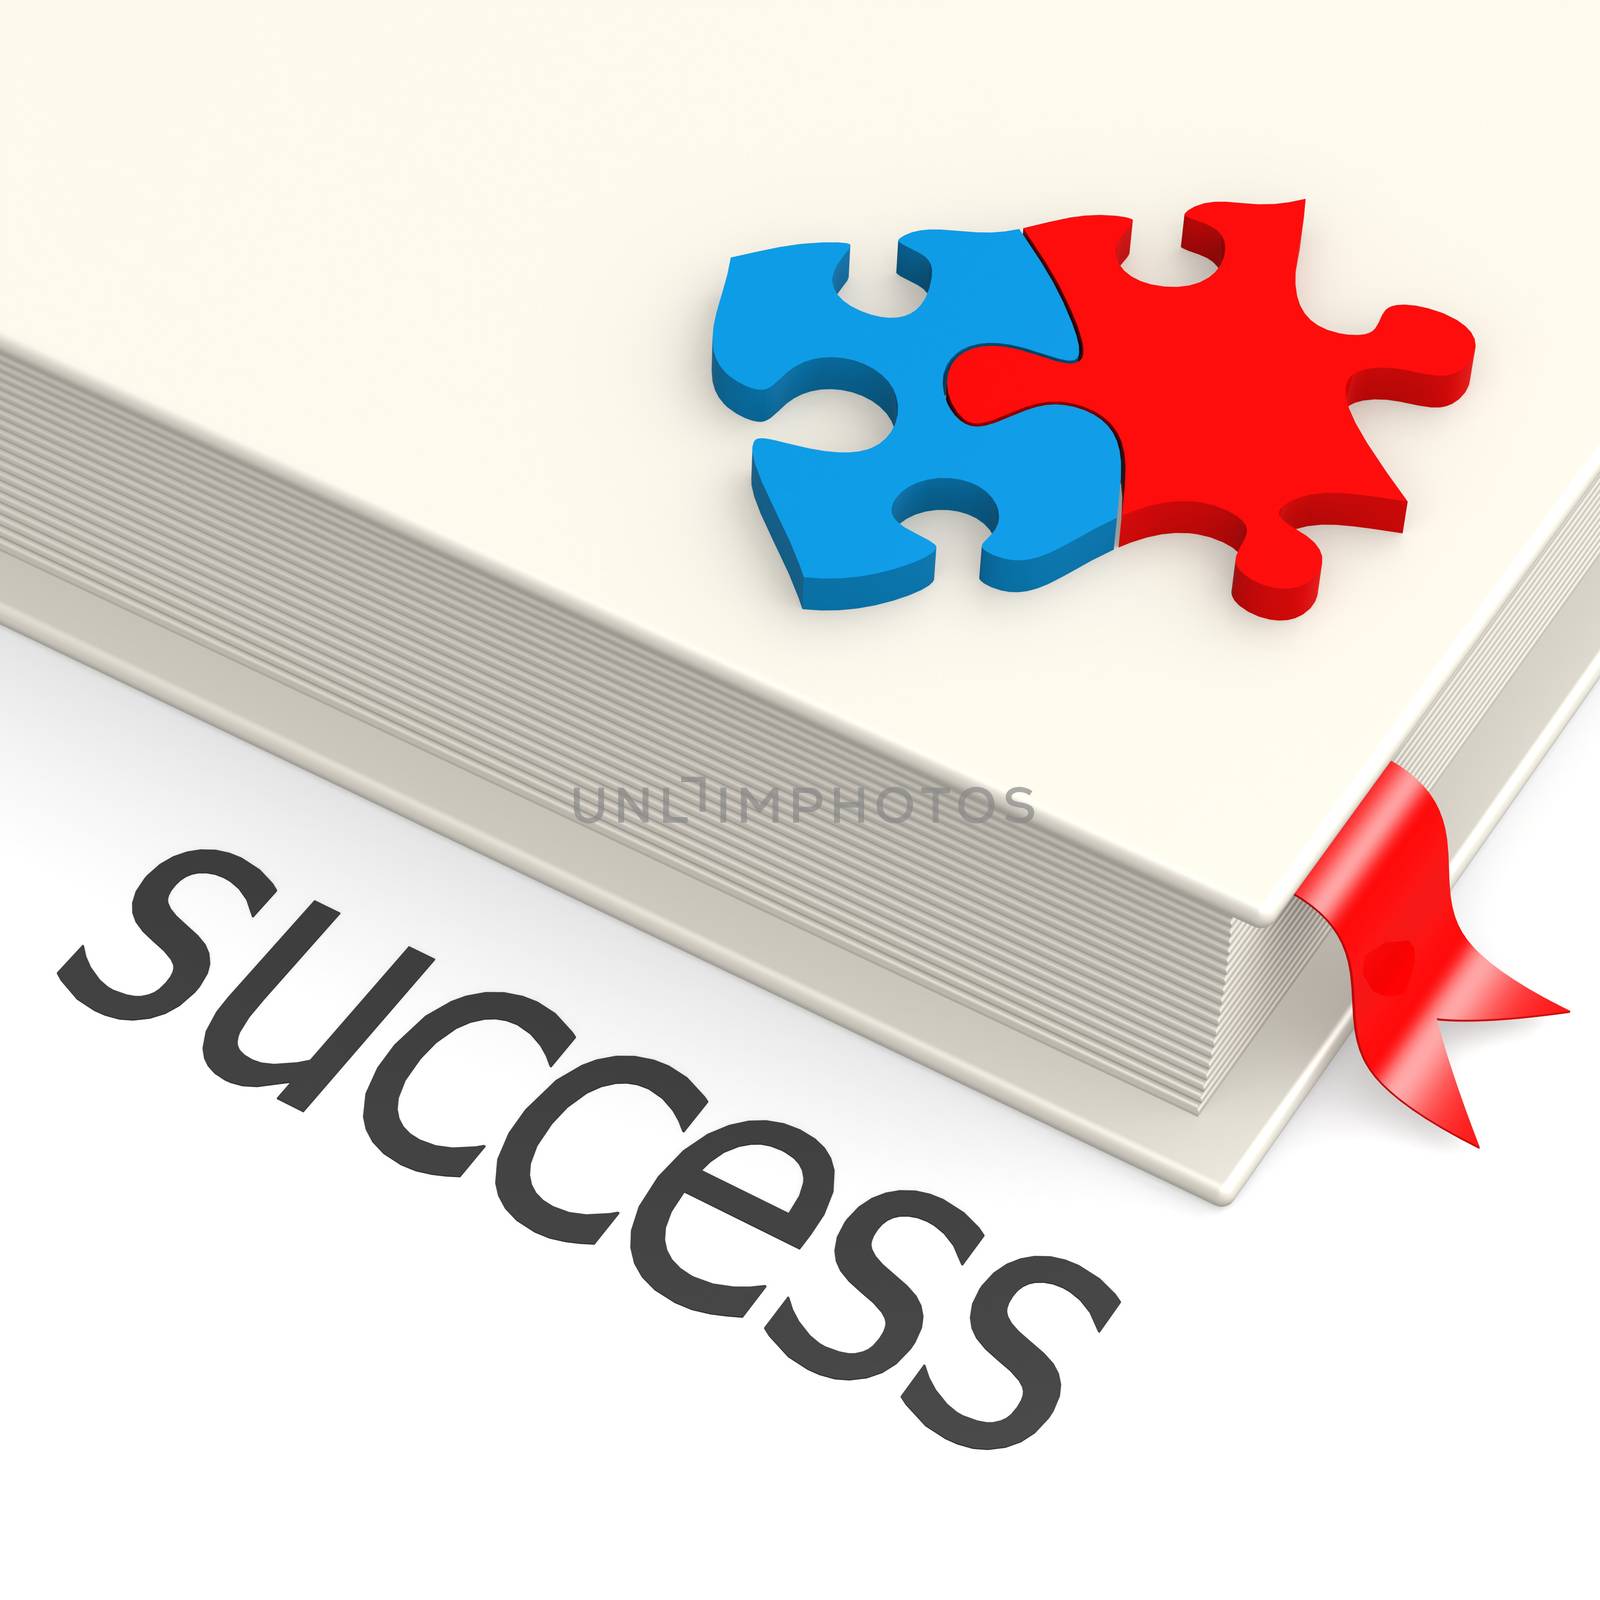 Success book by tang90246